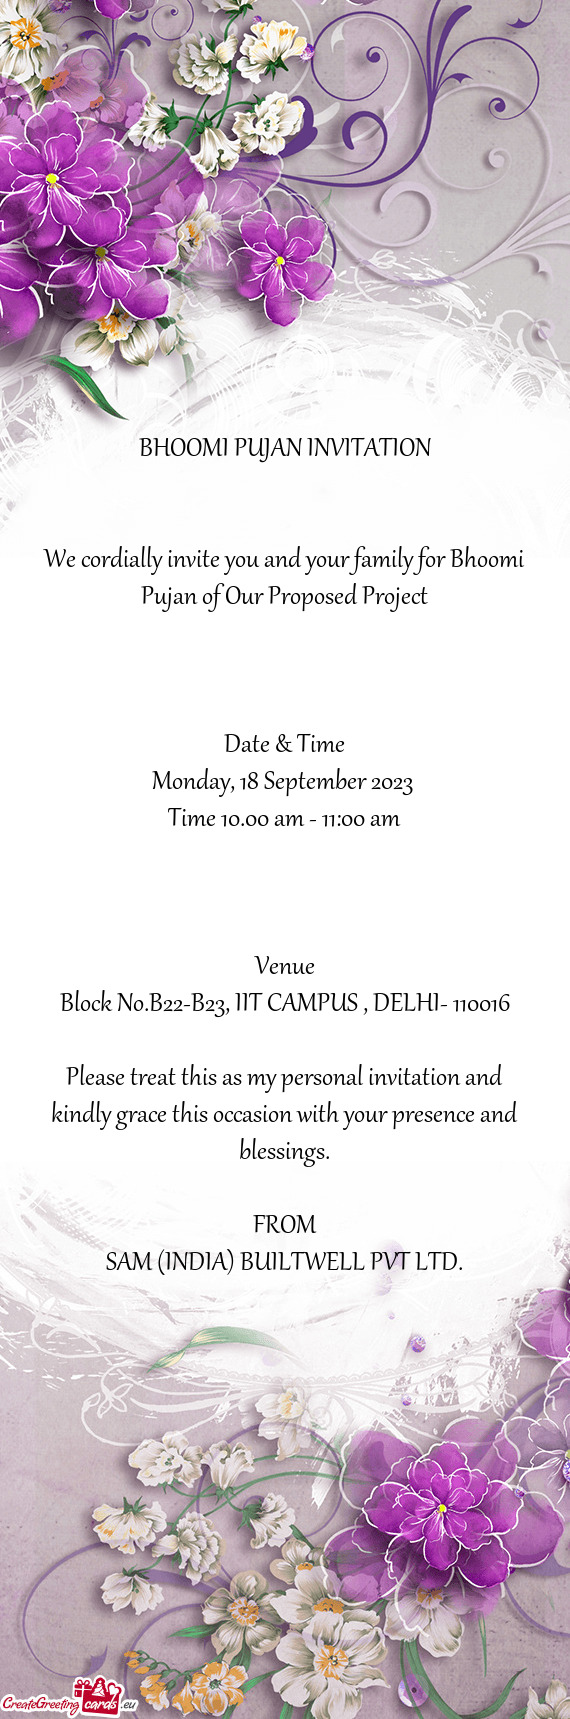 We cordially invite you and your family for Bhoomi Pujan of Our Proposed Project